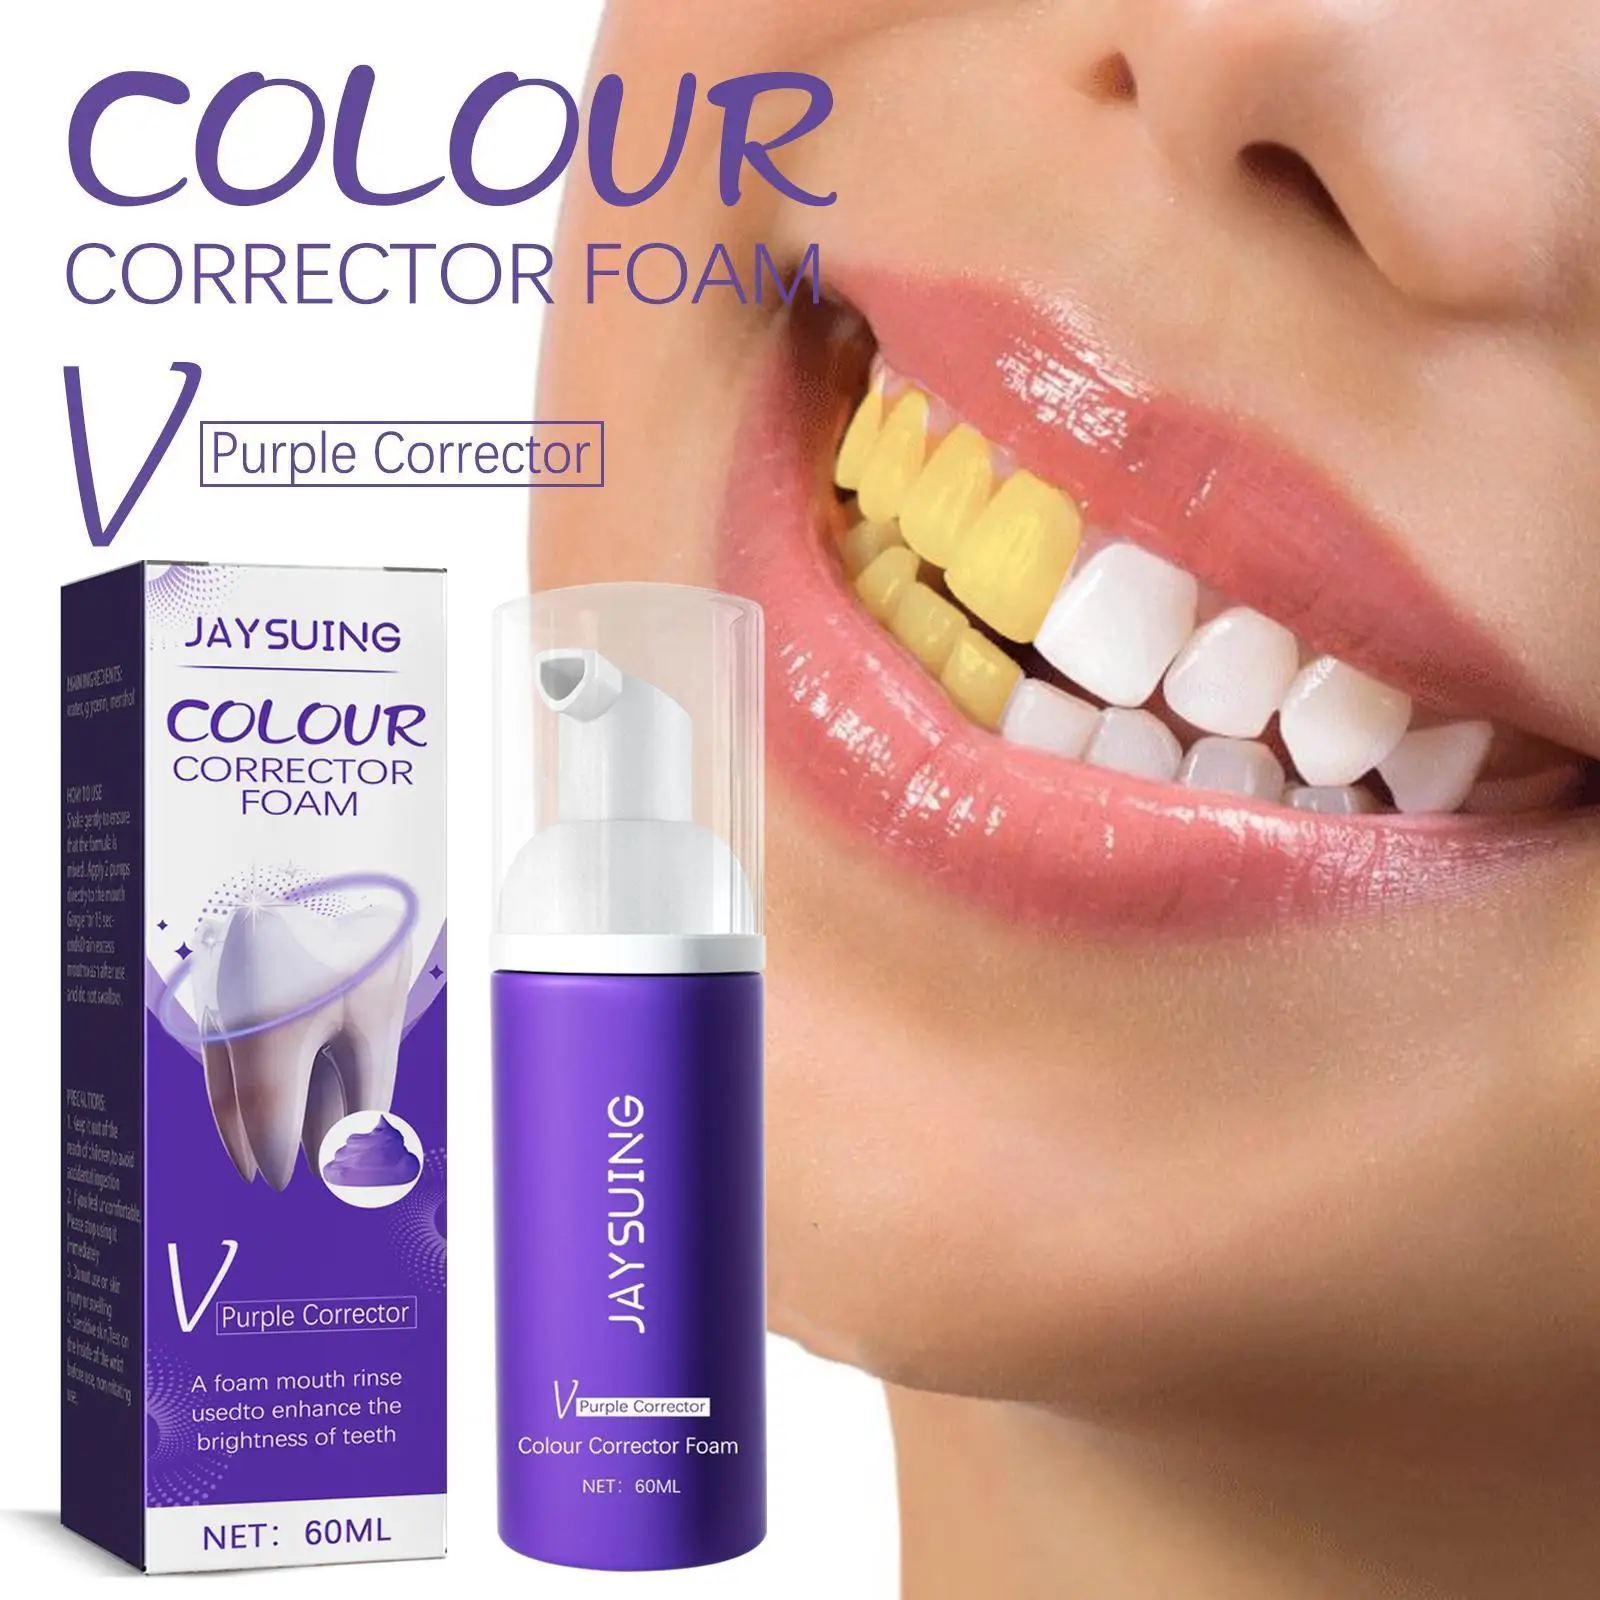 

60ml Ultra-Fine Mousse Foam Deep Cleansing Whitening Whiten Dissolve Teeth Breath And Clean Stains Foam Tooth Freshen New T C2L4